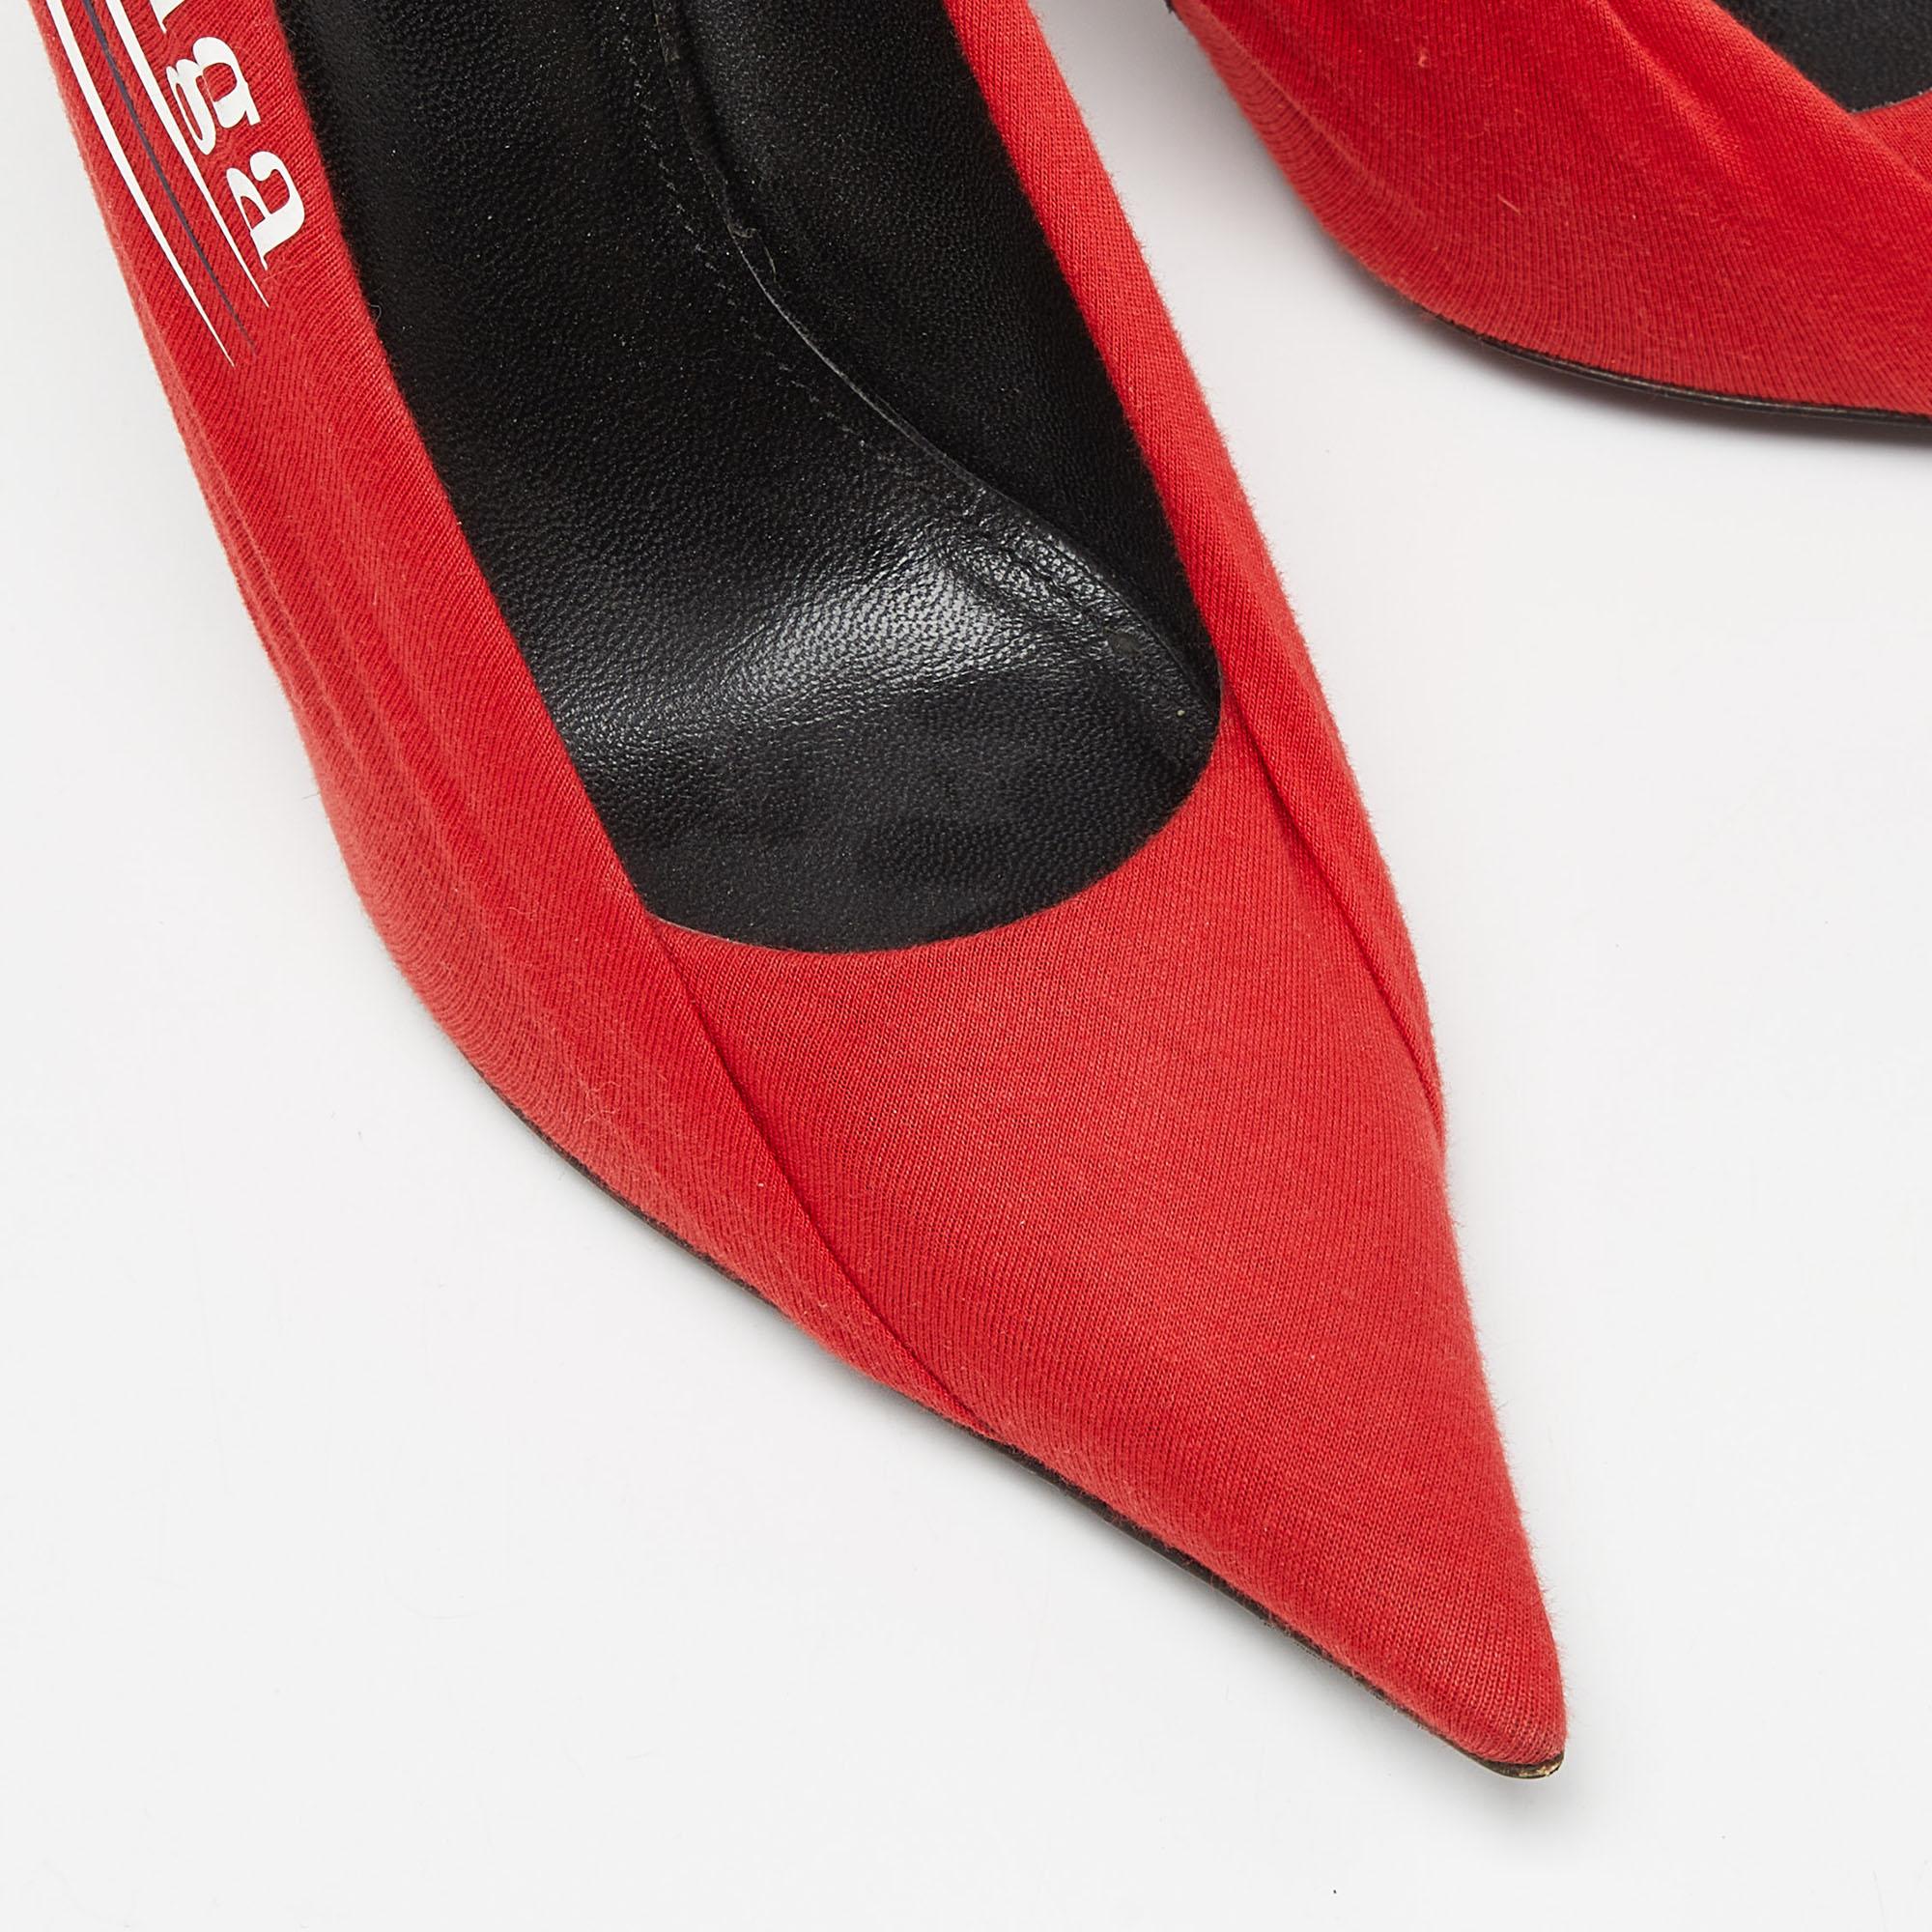 Balenciaga is prepared to leave you mesmerized with these Knife pumps. Draped with signature logo prints on the red fabric-leather body, this pointed-toe silhouette is set on 12 cm heels for an additional effect of elegance. Flaunt a trendsetting